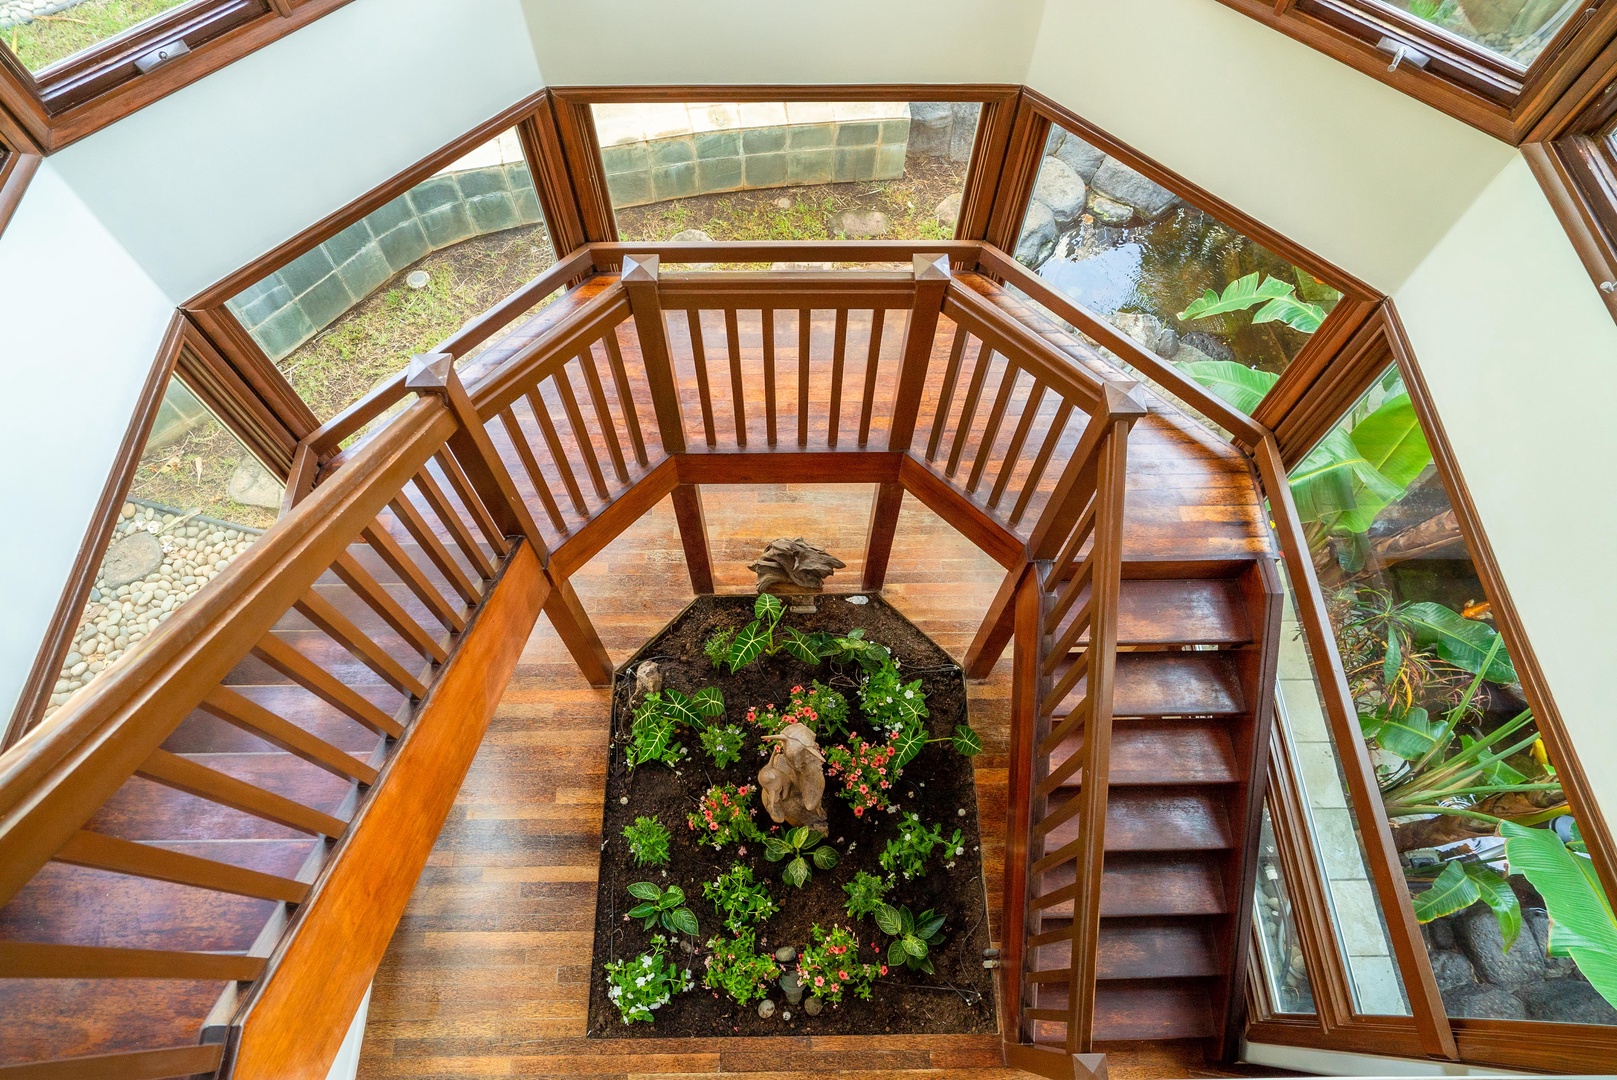 Honolulu Vacation Rentals, Kaiko'o Villa** - Beautiful wooden stairs lead to the top floor